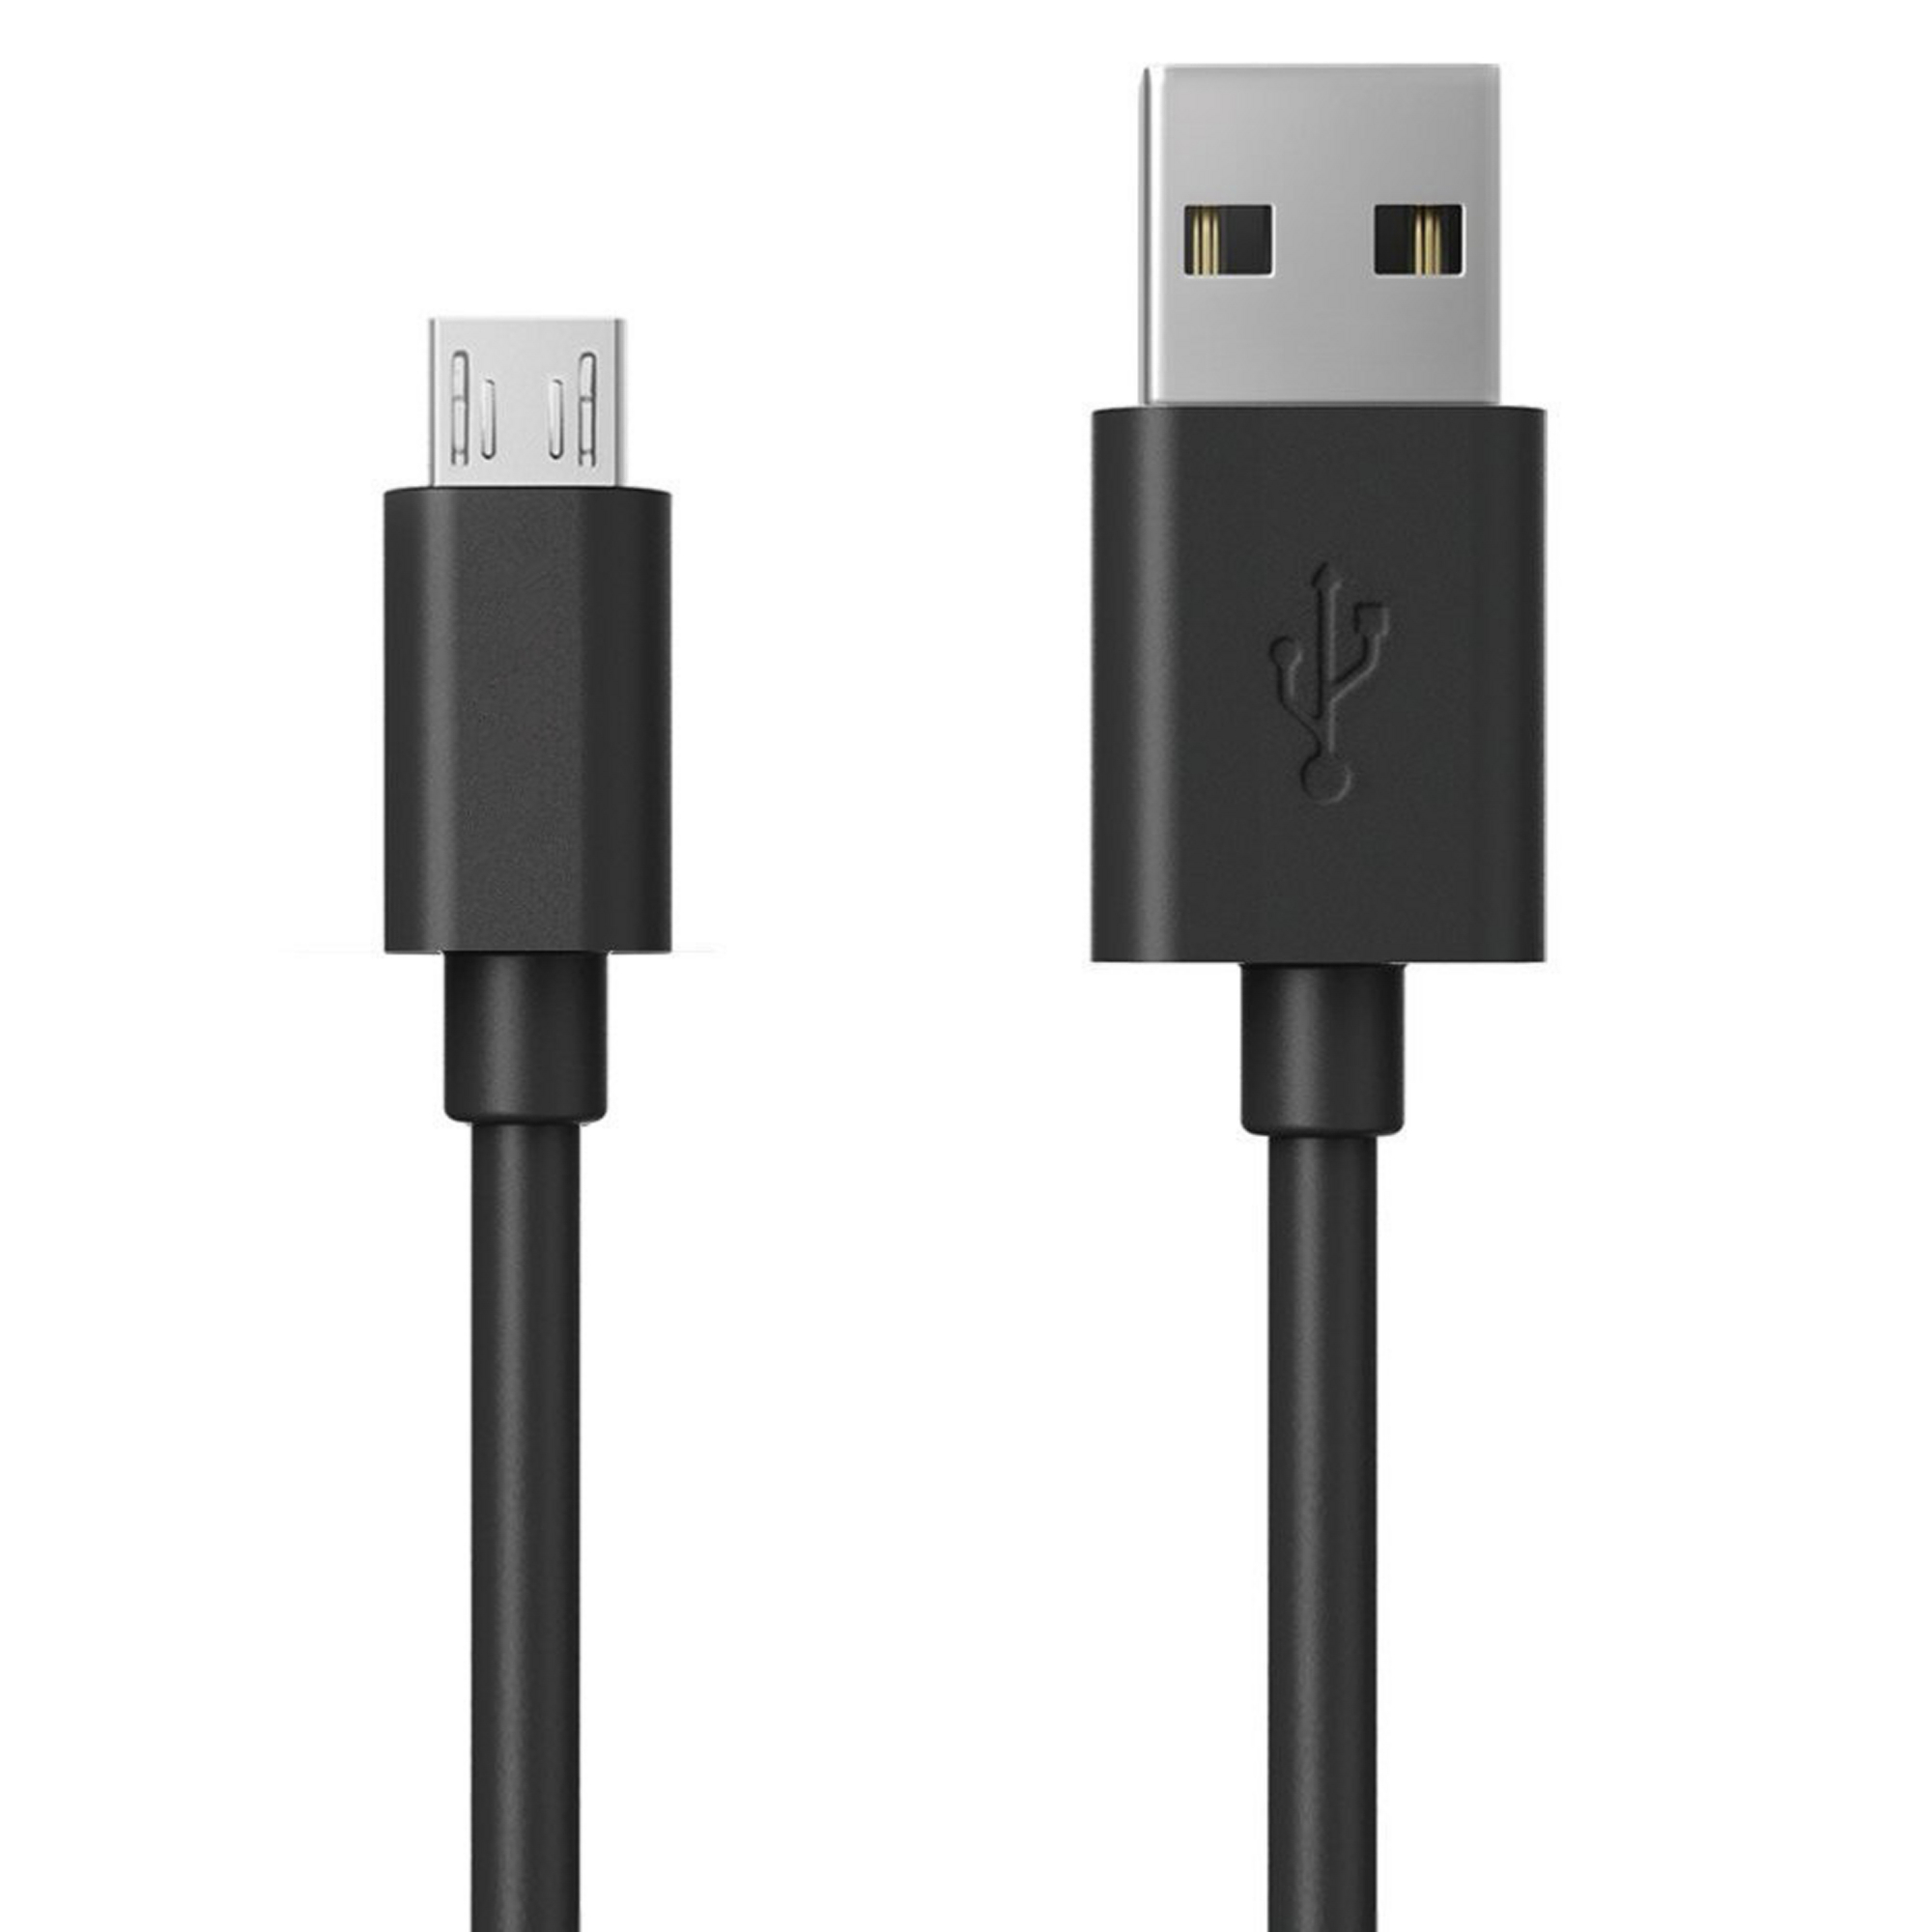 REALPOWER Micro-USB cable USB Kabel